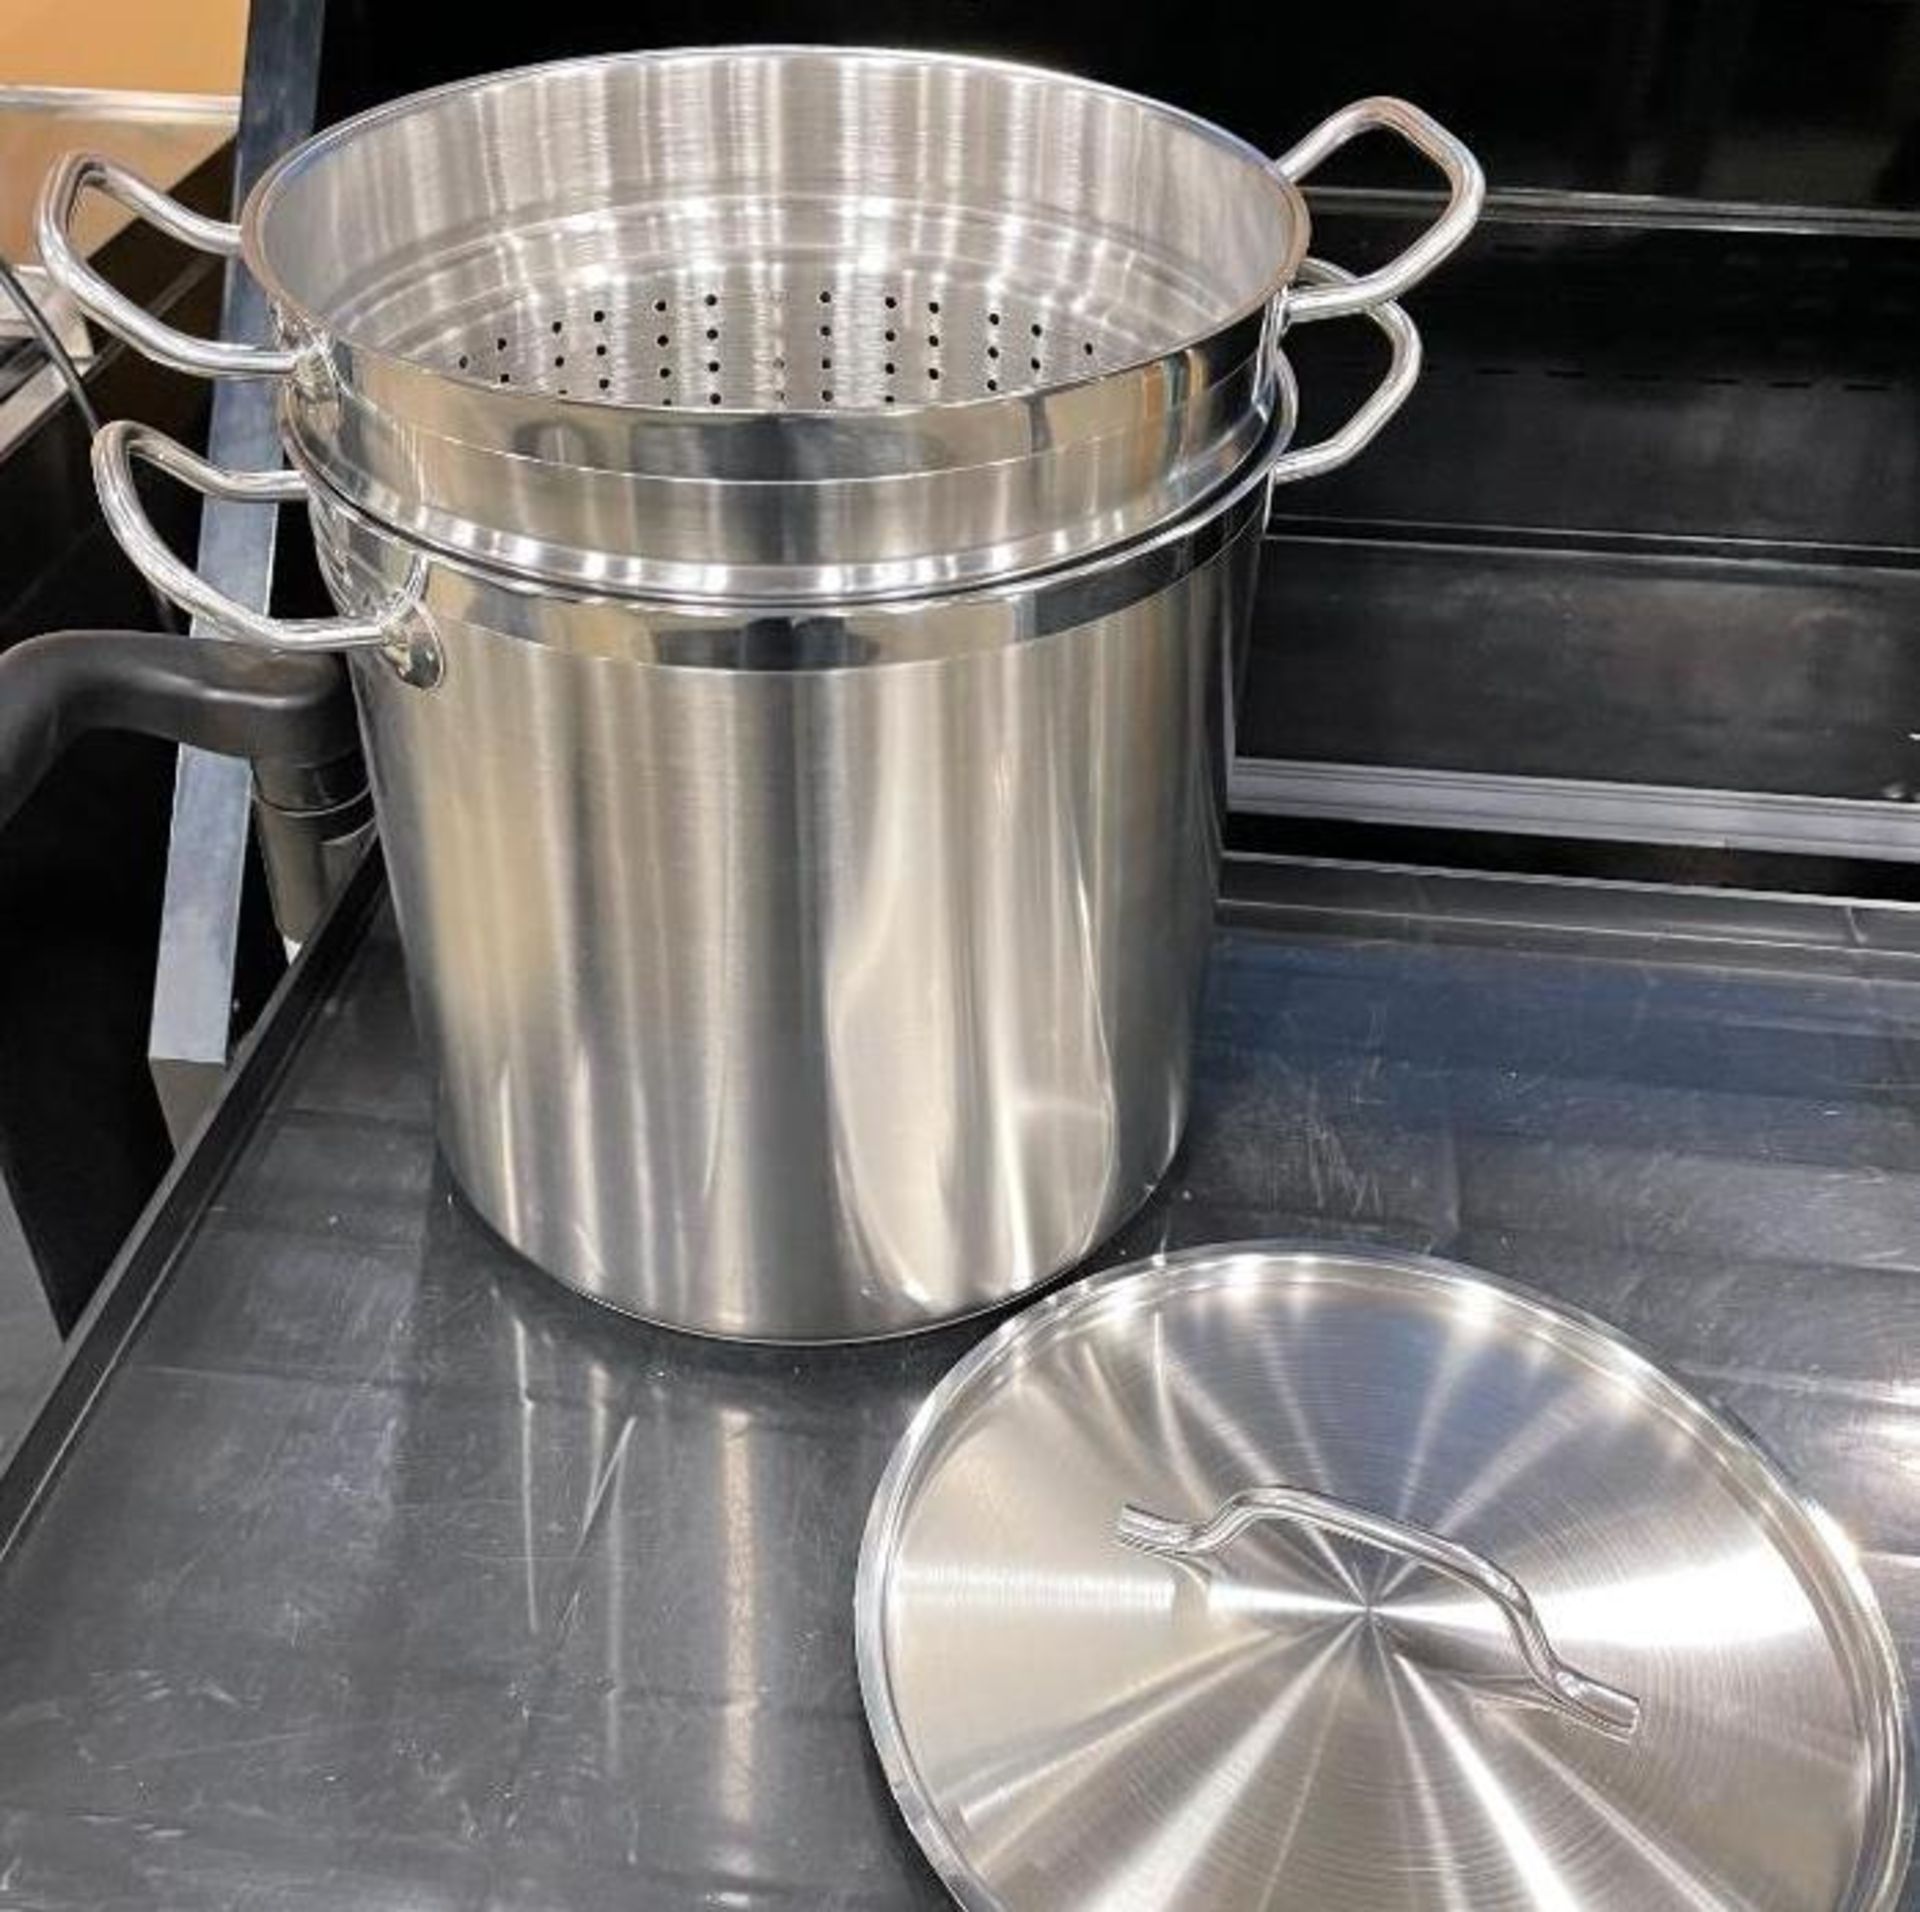 20QT HEAVY DUTY STAINLESS STOCK POT INDUCTION CAPABLE & STEAMER BASKET, JR 47202 & 47204 - NEW - Image 4 of 6